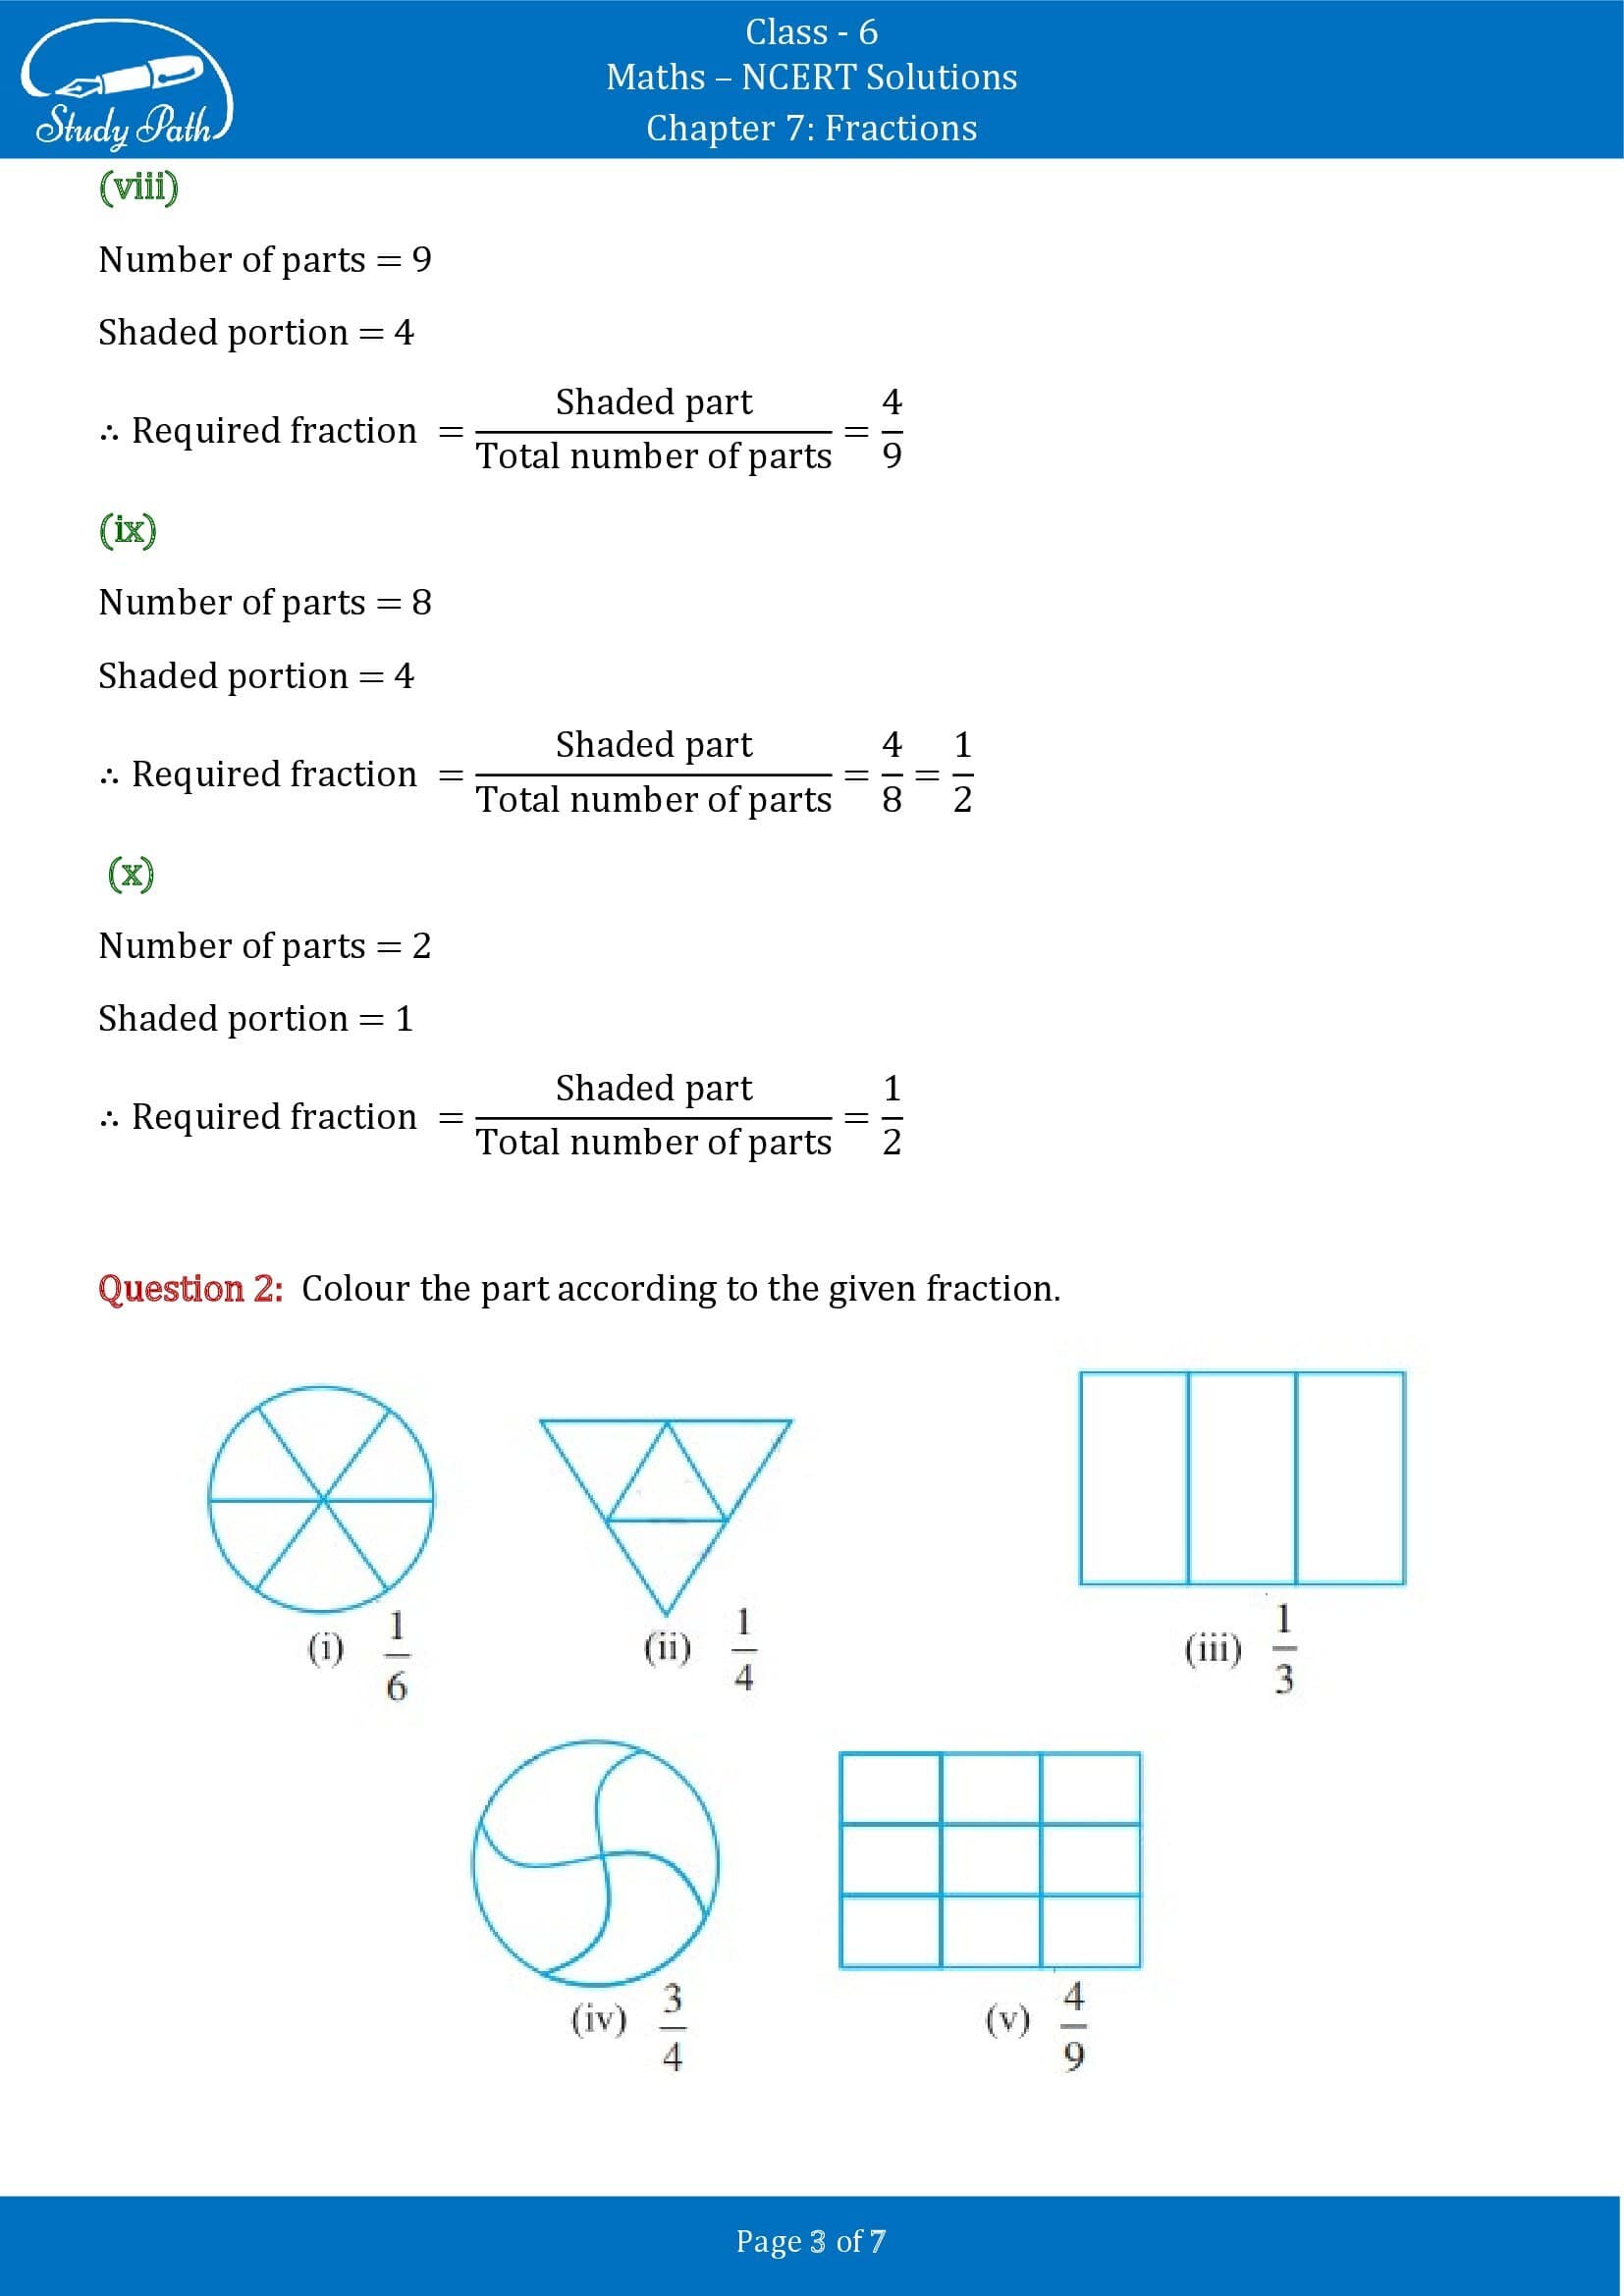 NCERT Solutions for Class 6 Maths Chapter 7 Fractions Exercise 7.1 00003